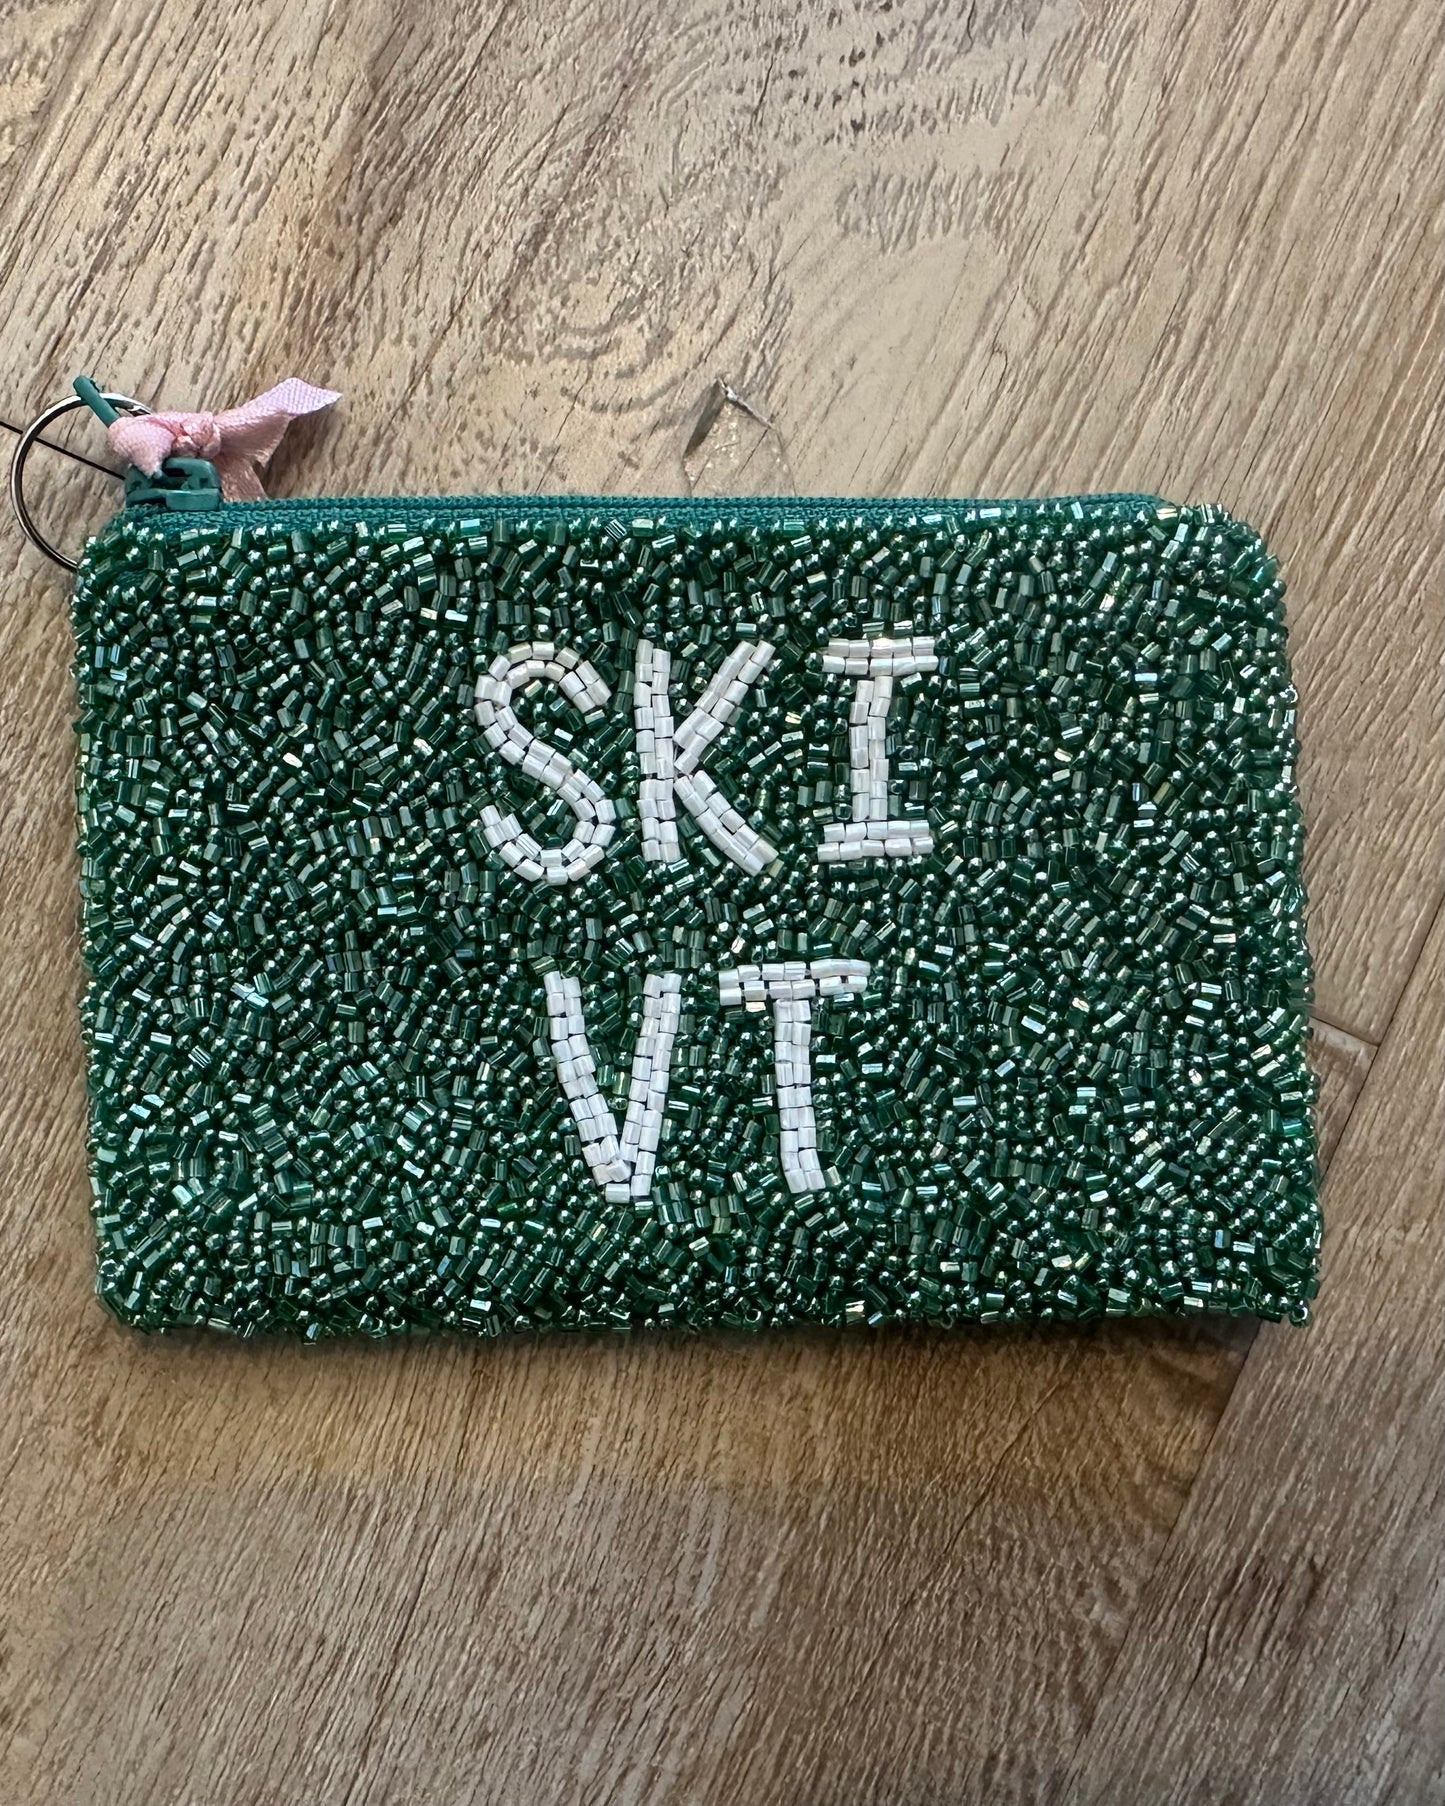 Image of ski Vermont in green and white on a wood background